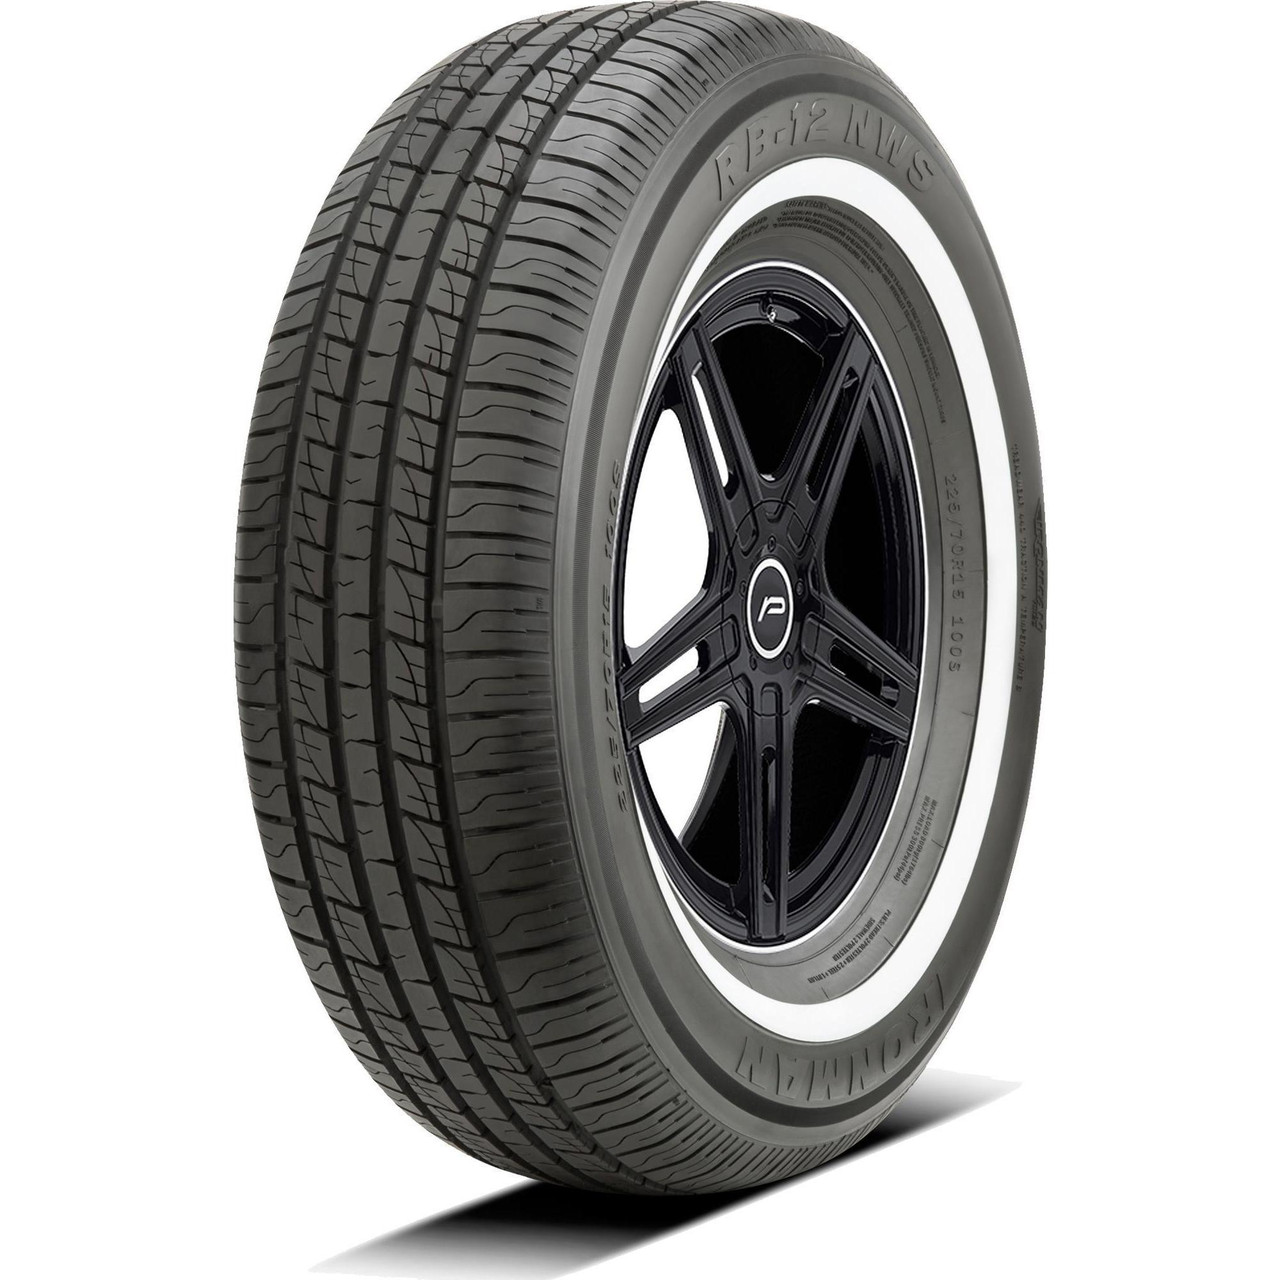 195/75R14 92S IRONMAN RB12 NWS WHITE WALL